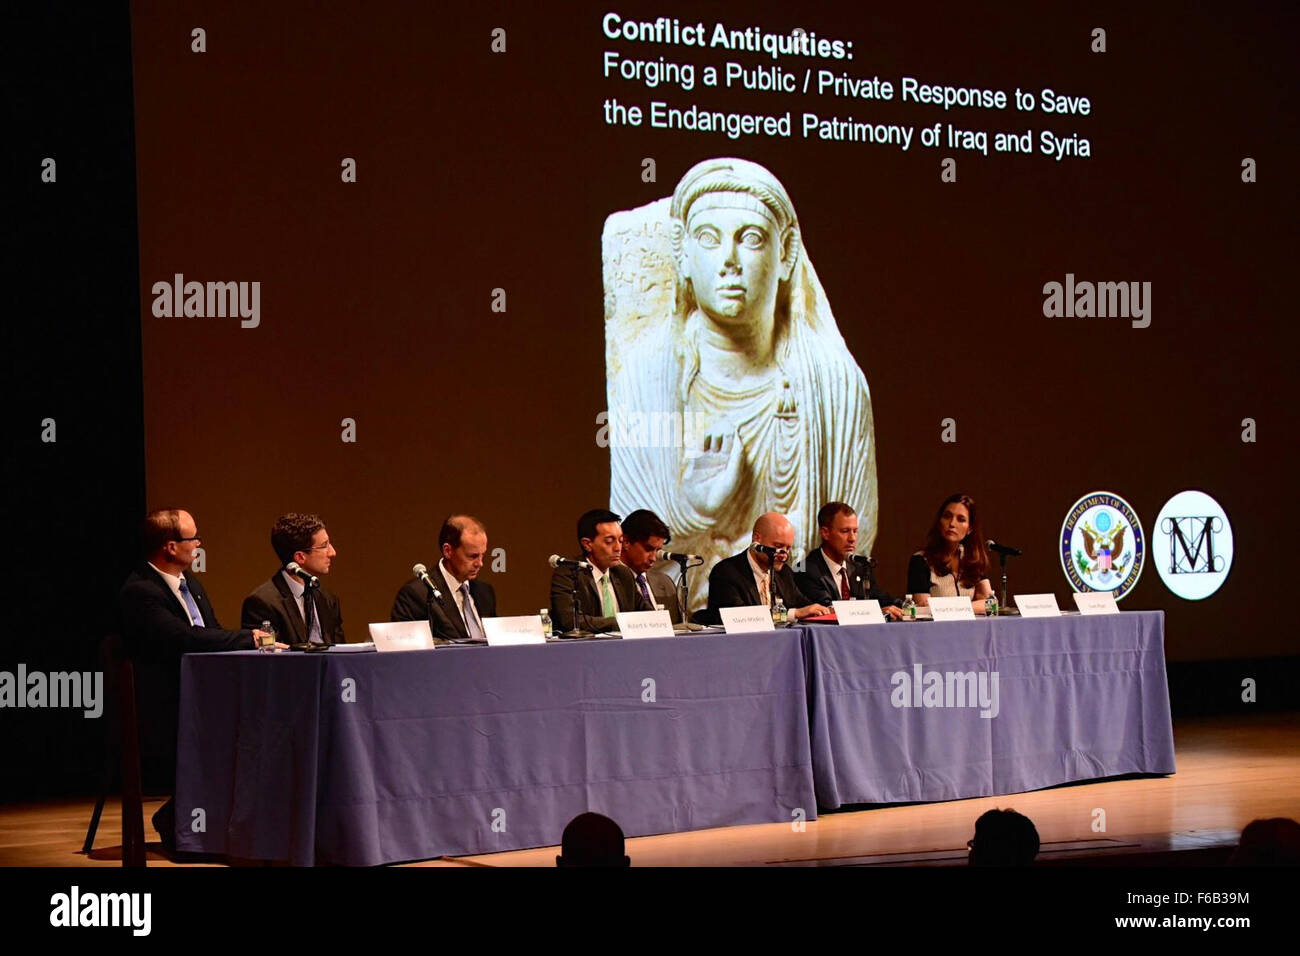 Assistant Secretary Ryan Participates in a Panel on Conflict Antiquities at the Metropolitan Museum of Art in New York City Stock Photo